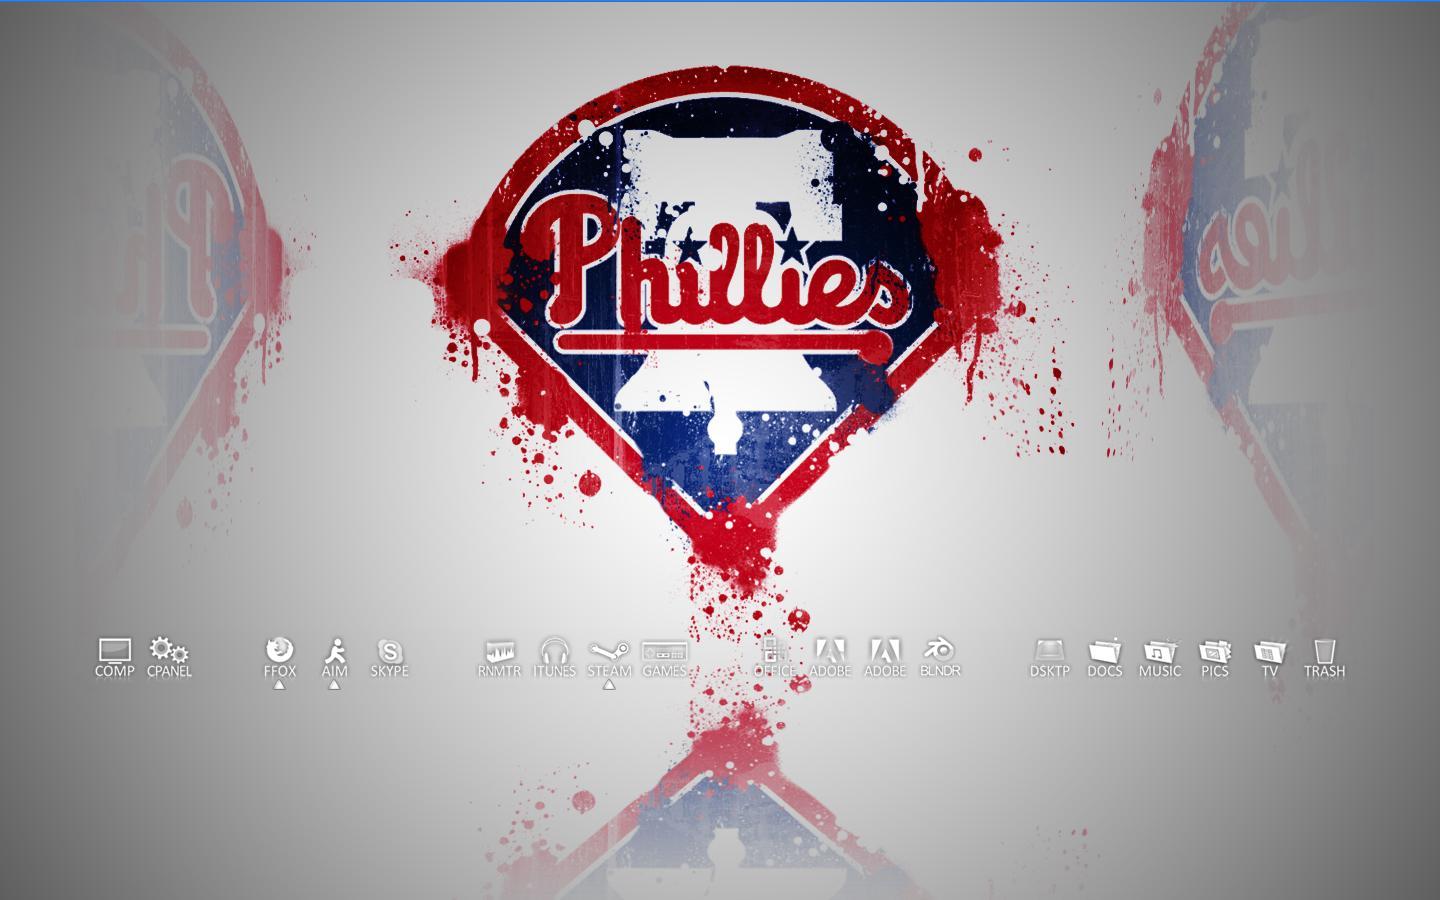 Phillies Wallpaper 2018 (60+ images)